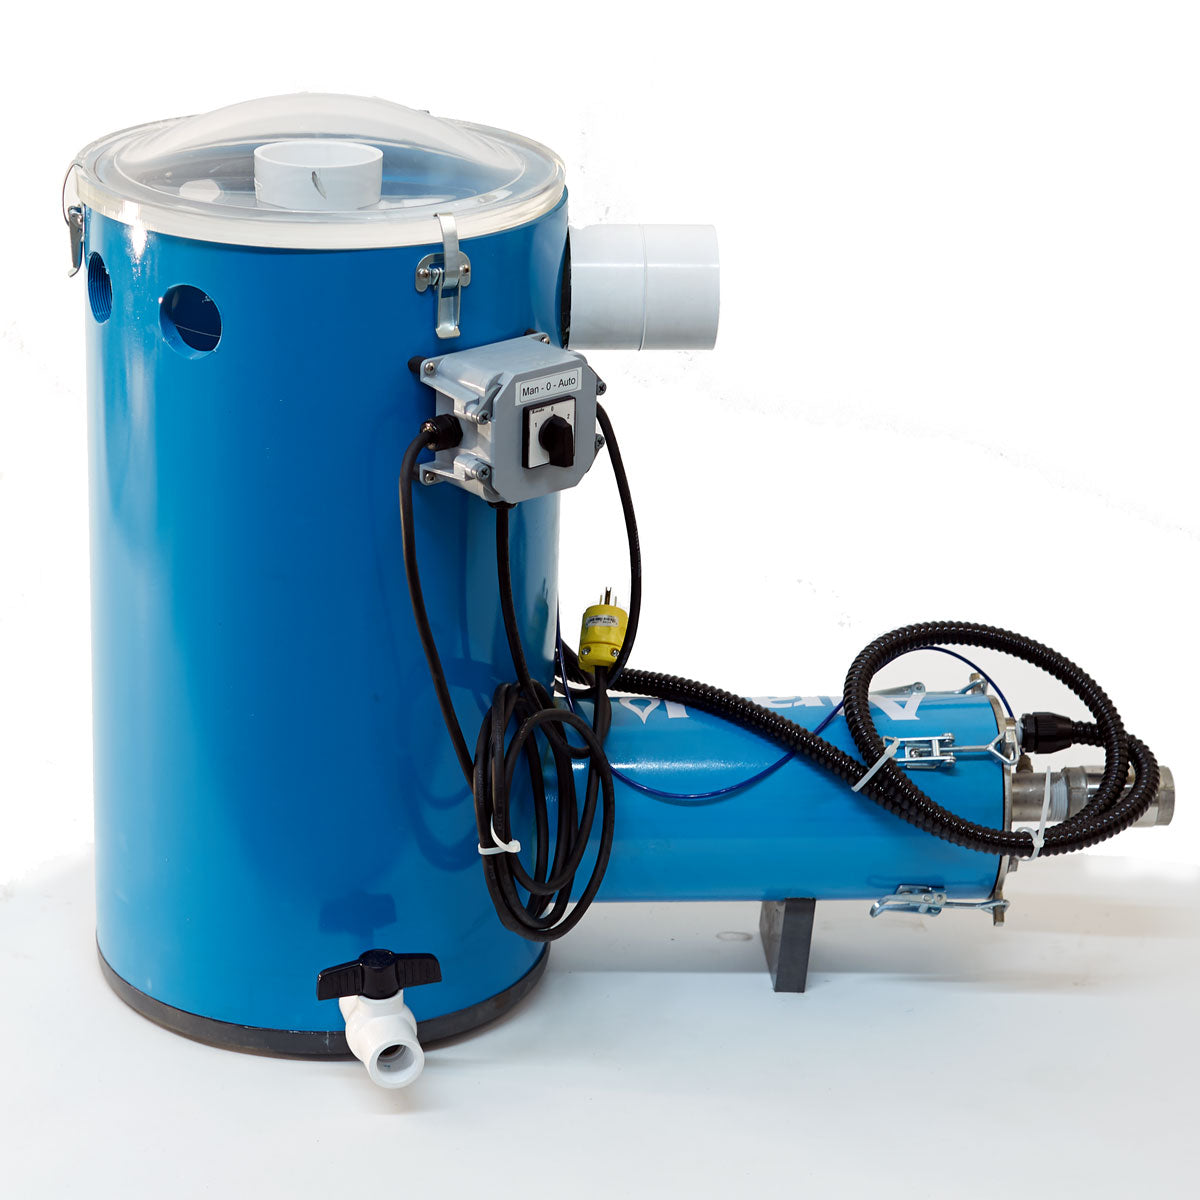 Leader Electric Releaser with 1/2 HP Sump Pump (for 2,500 taps)